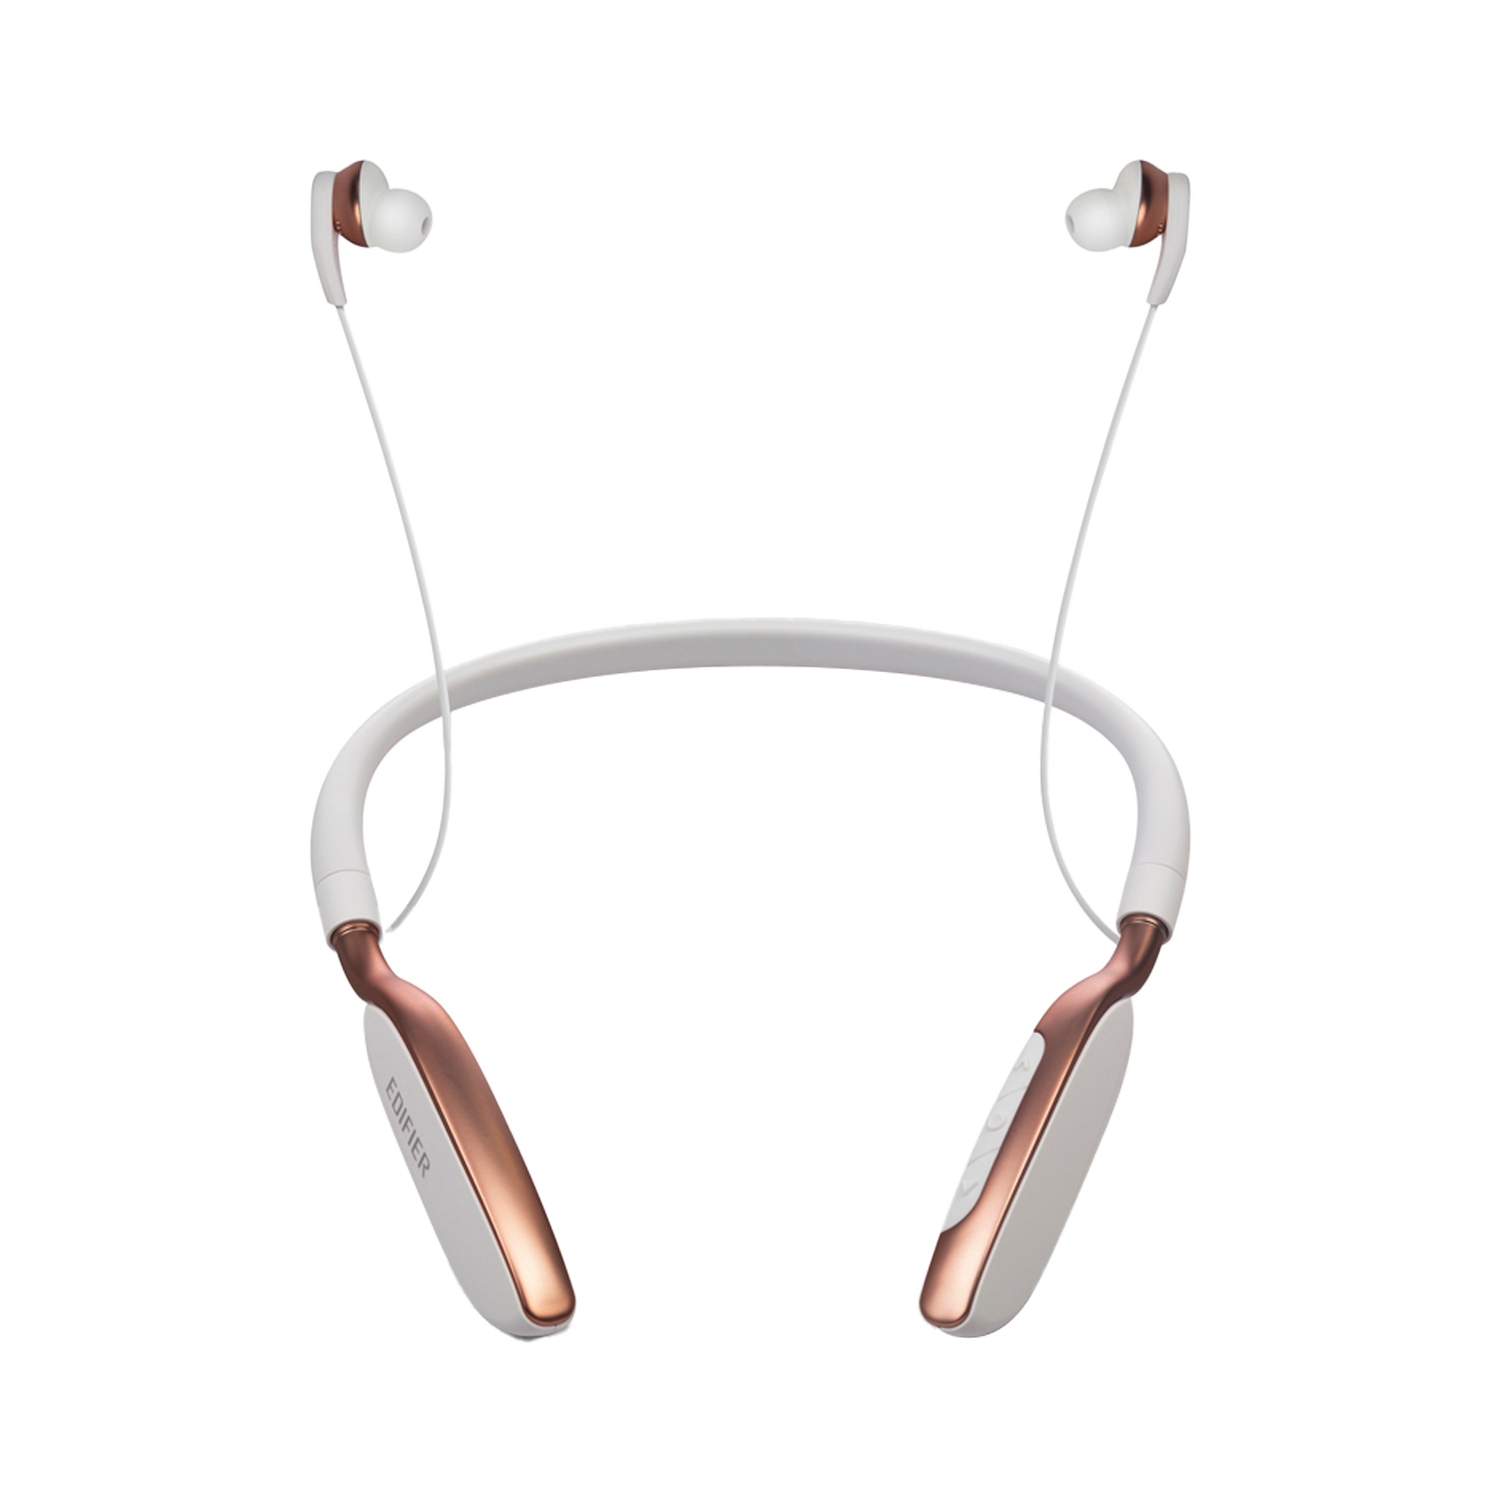 W360NB Active Noise Cancelling Bluetooth Headphones